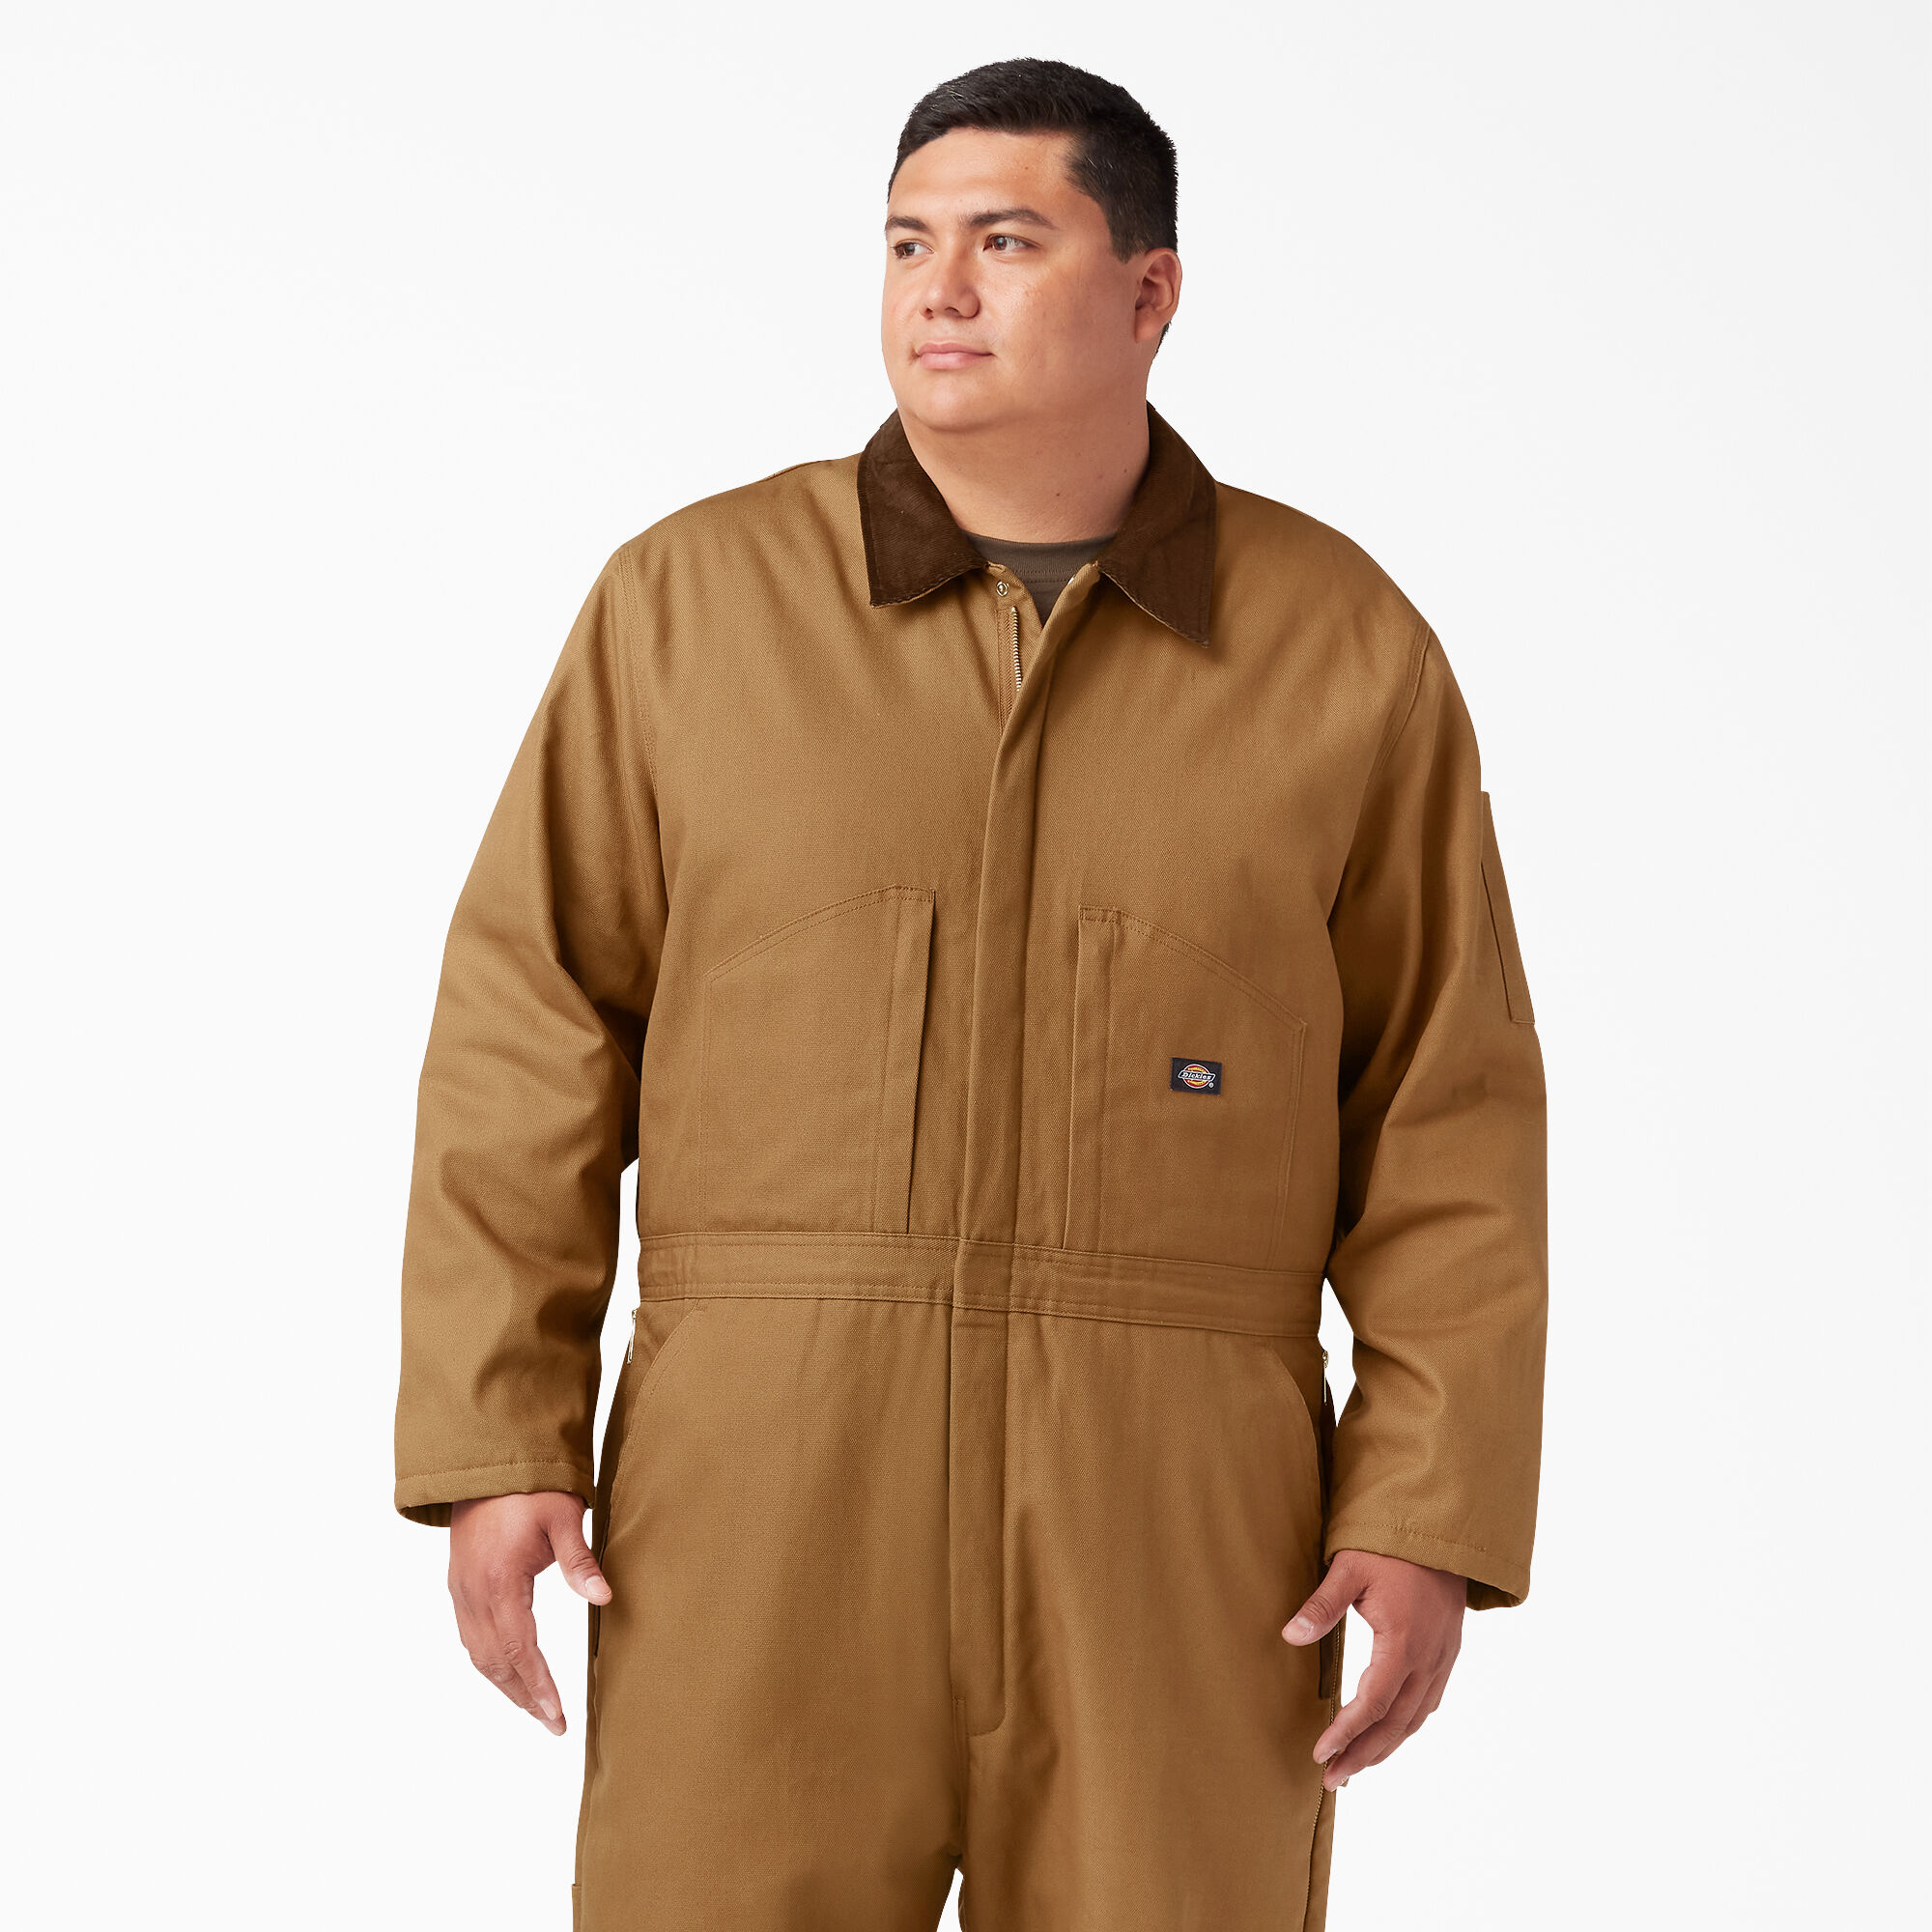 Men's Duck Insulated Coveralls - Dickies US